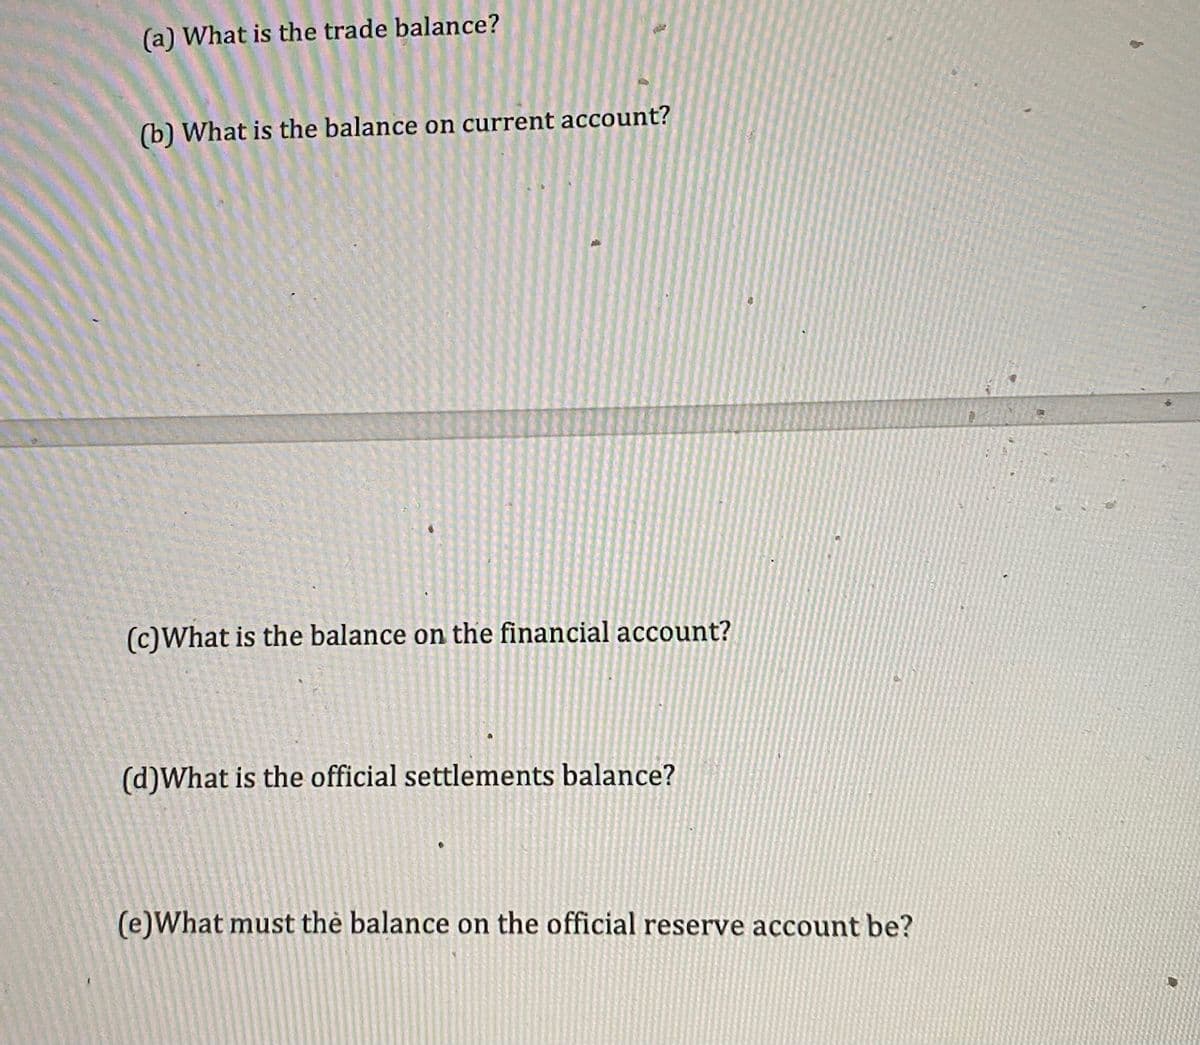 (a) What is the trade balance?
(b) What is the balance on current account?
(c)What is the balance on the financial account?
(d)What is the official settlements balance?
(e)What must thẻ balance on the official reserve account be?
